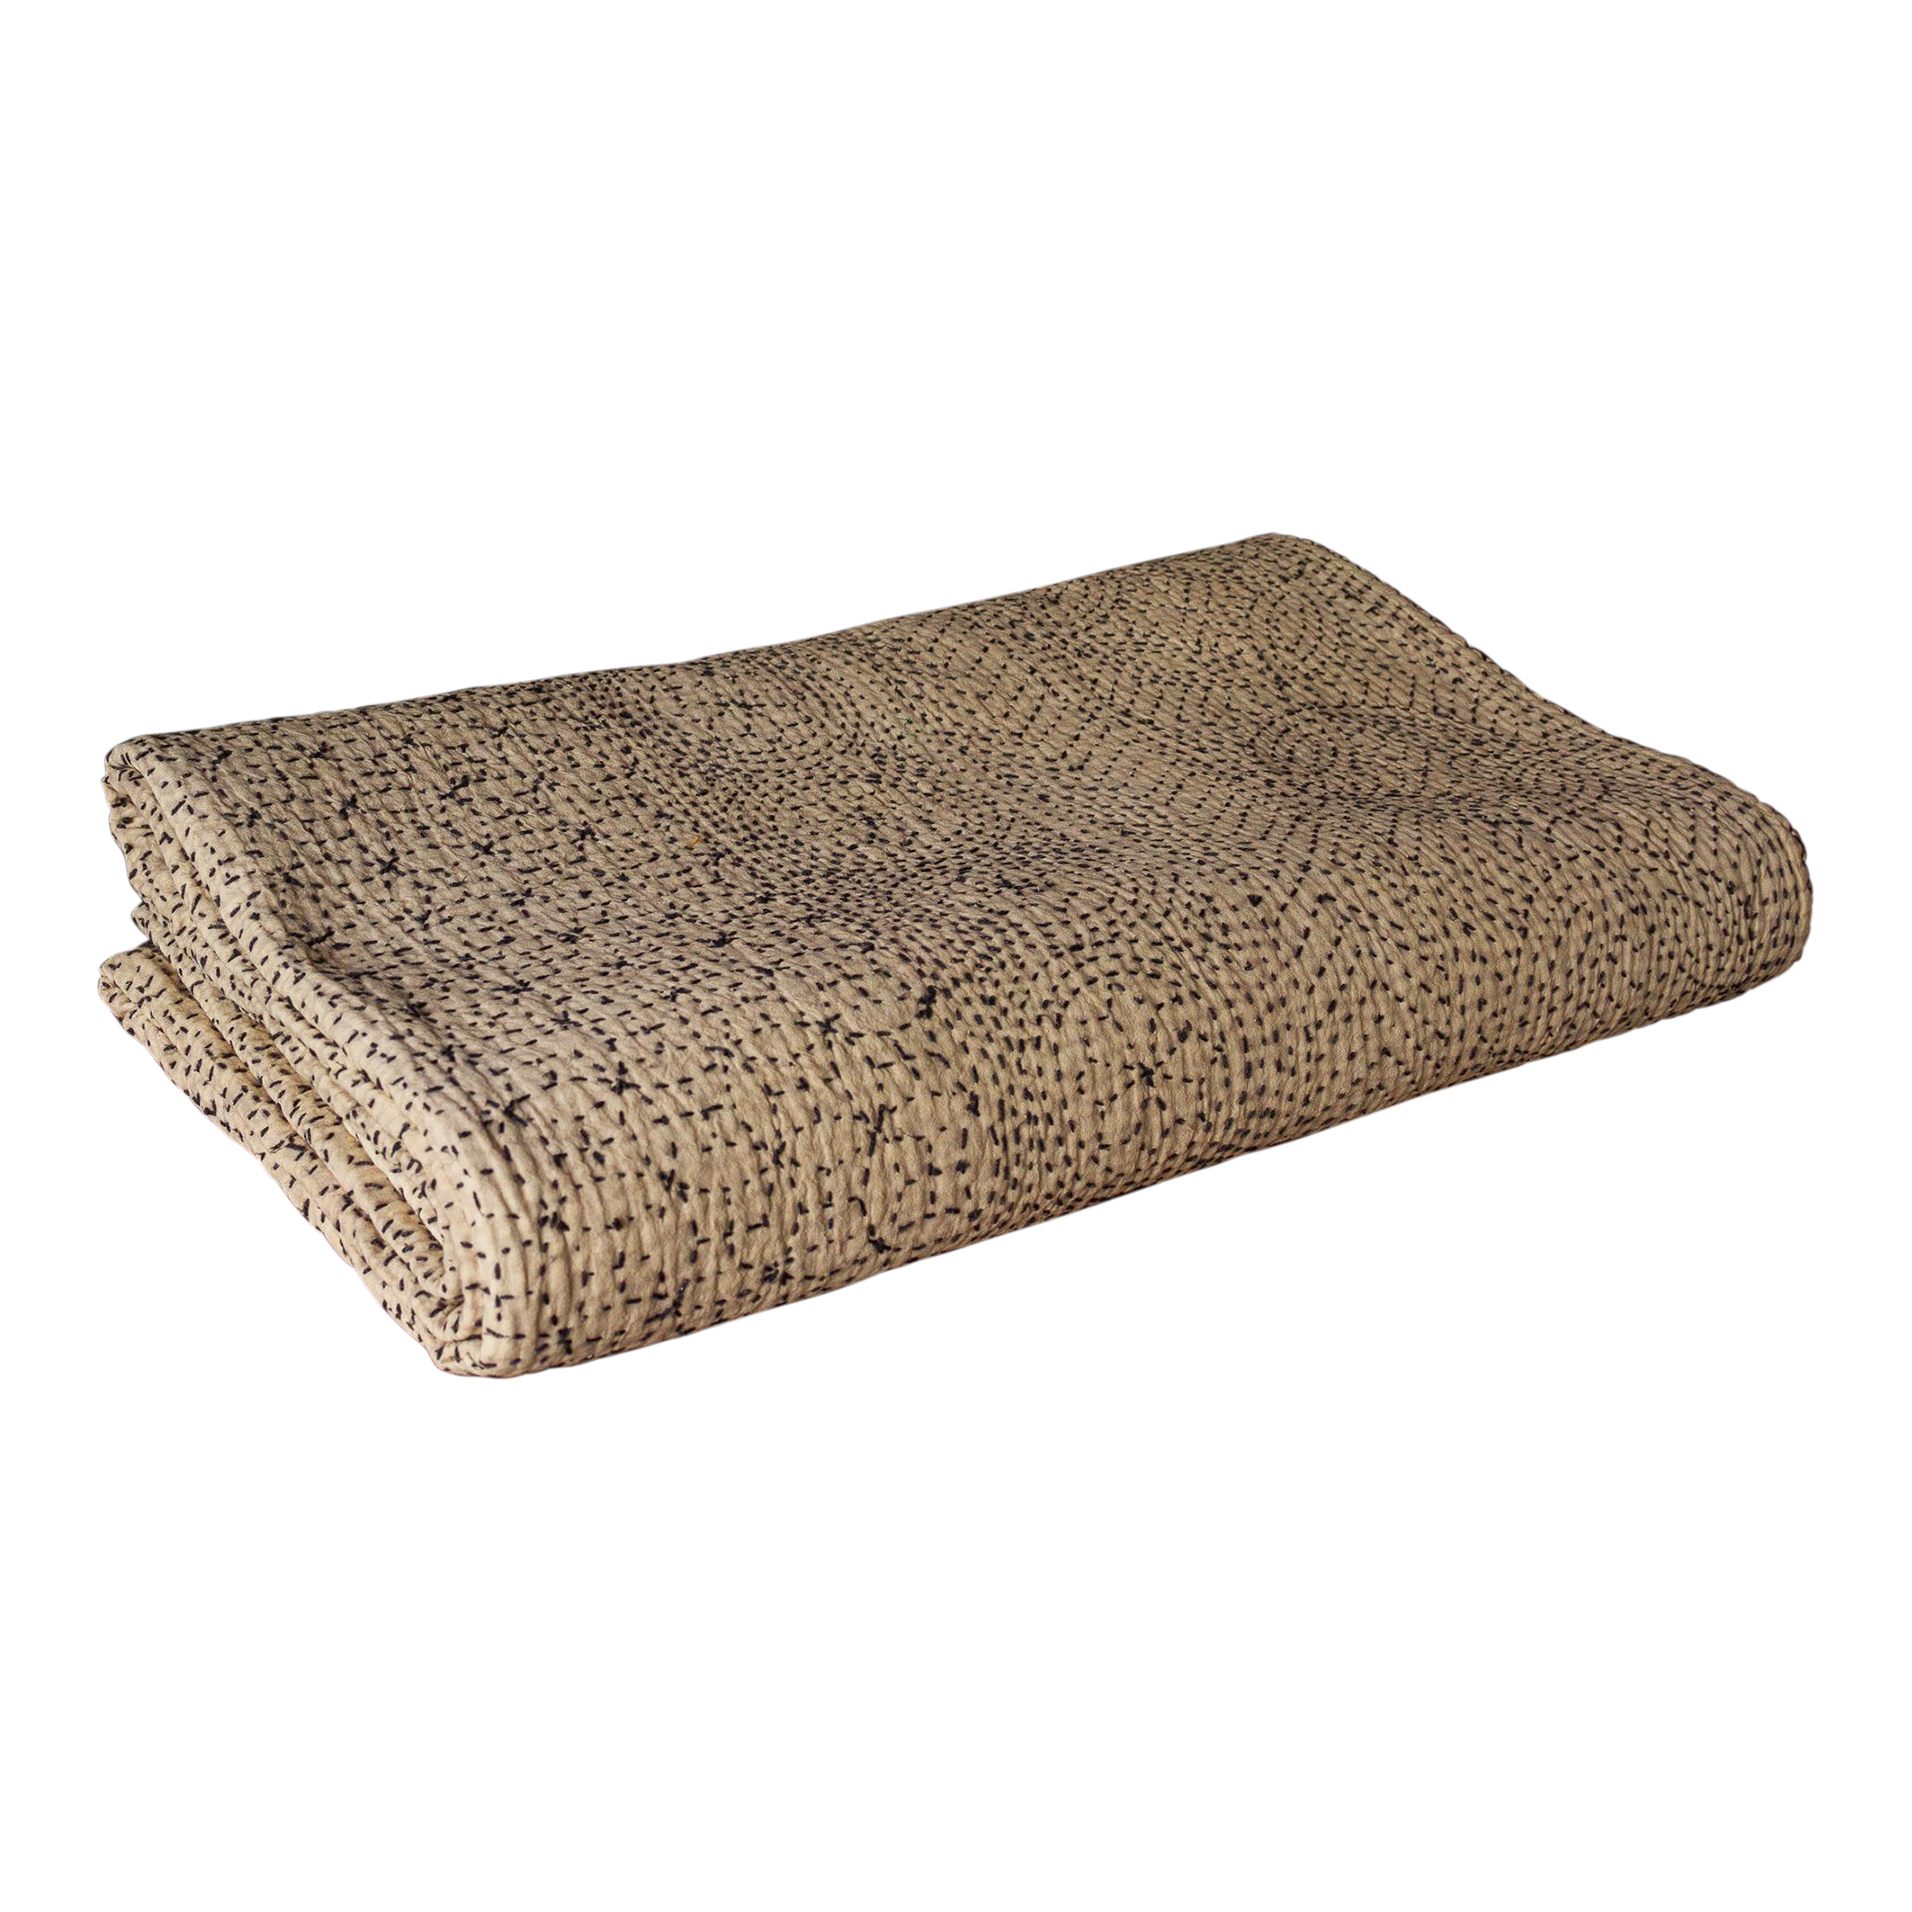 Tan Filanan Embroidered Bed Cover~P77657863